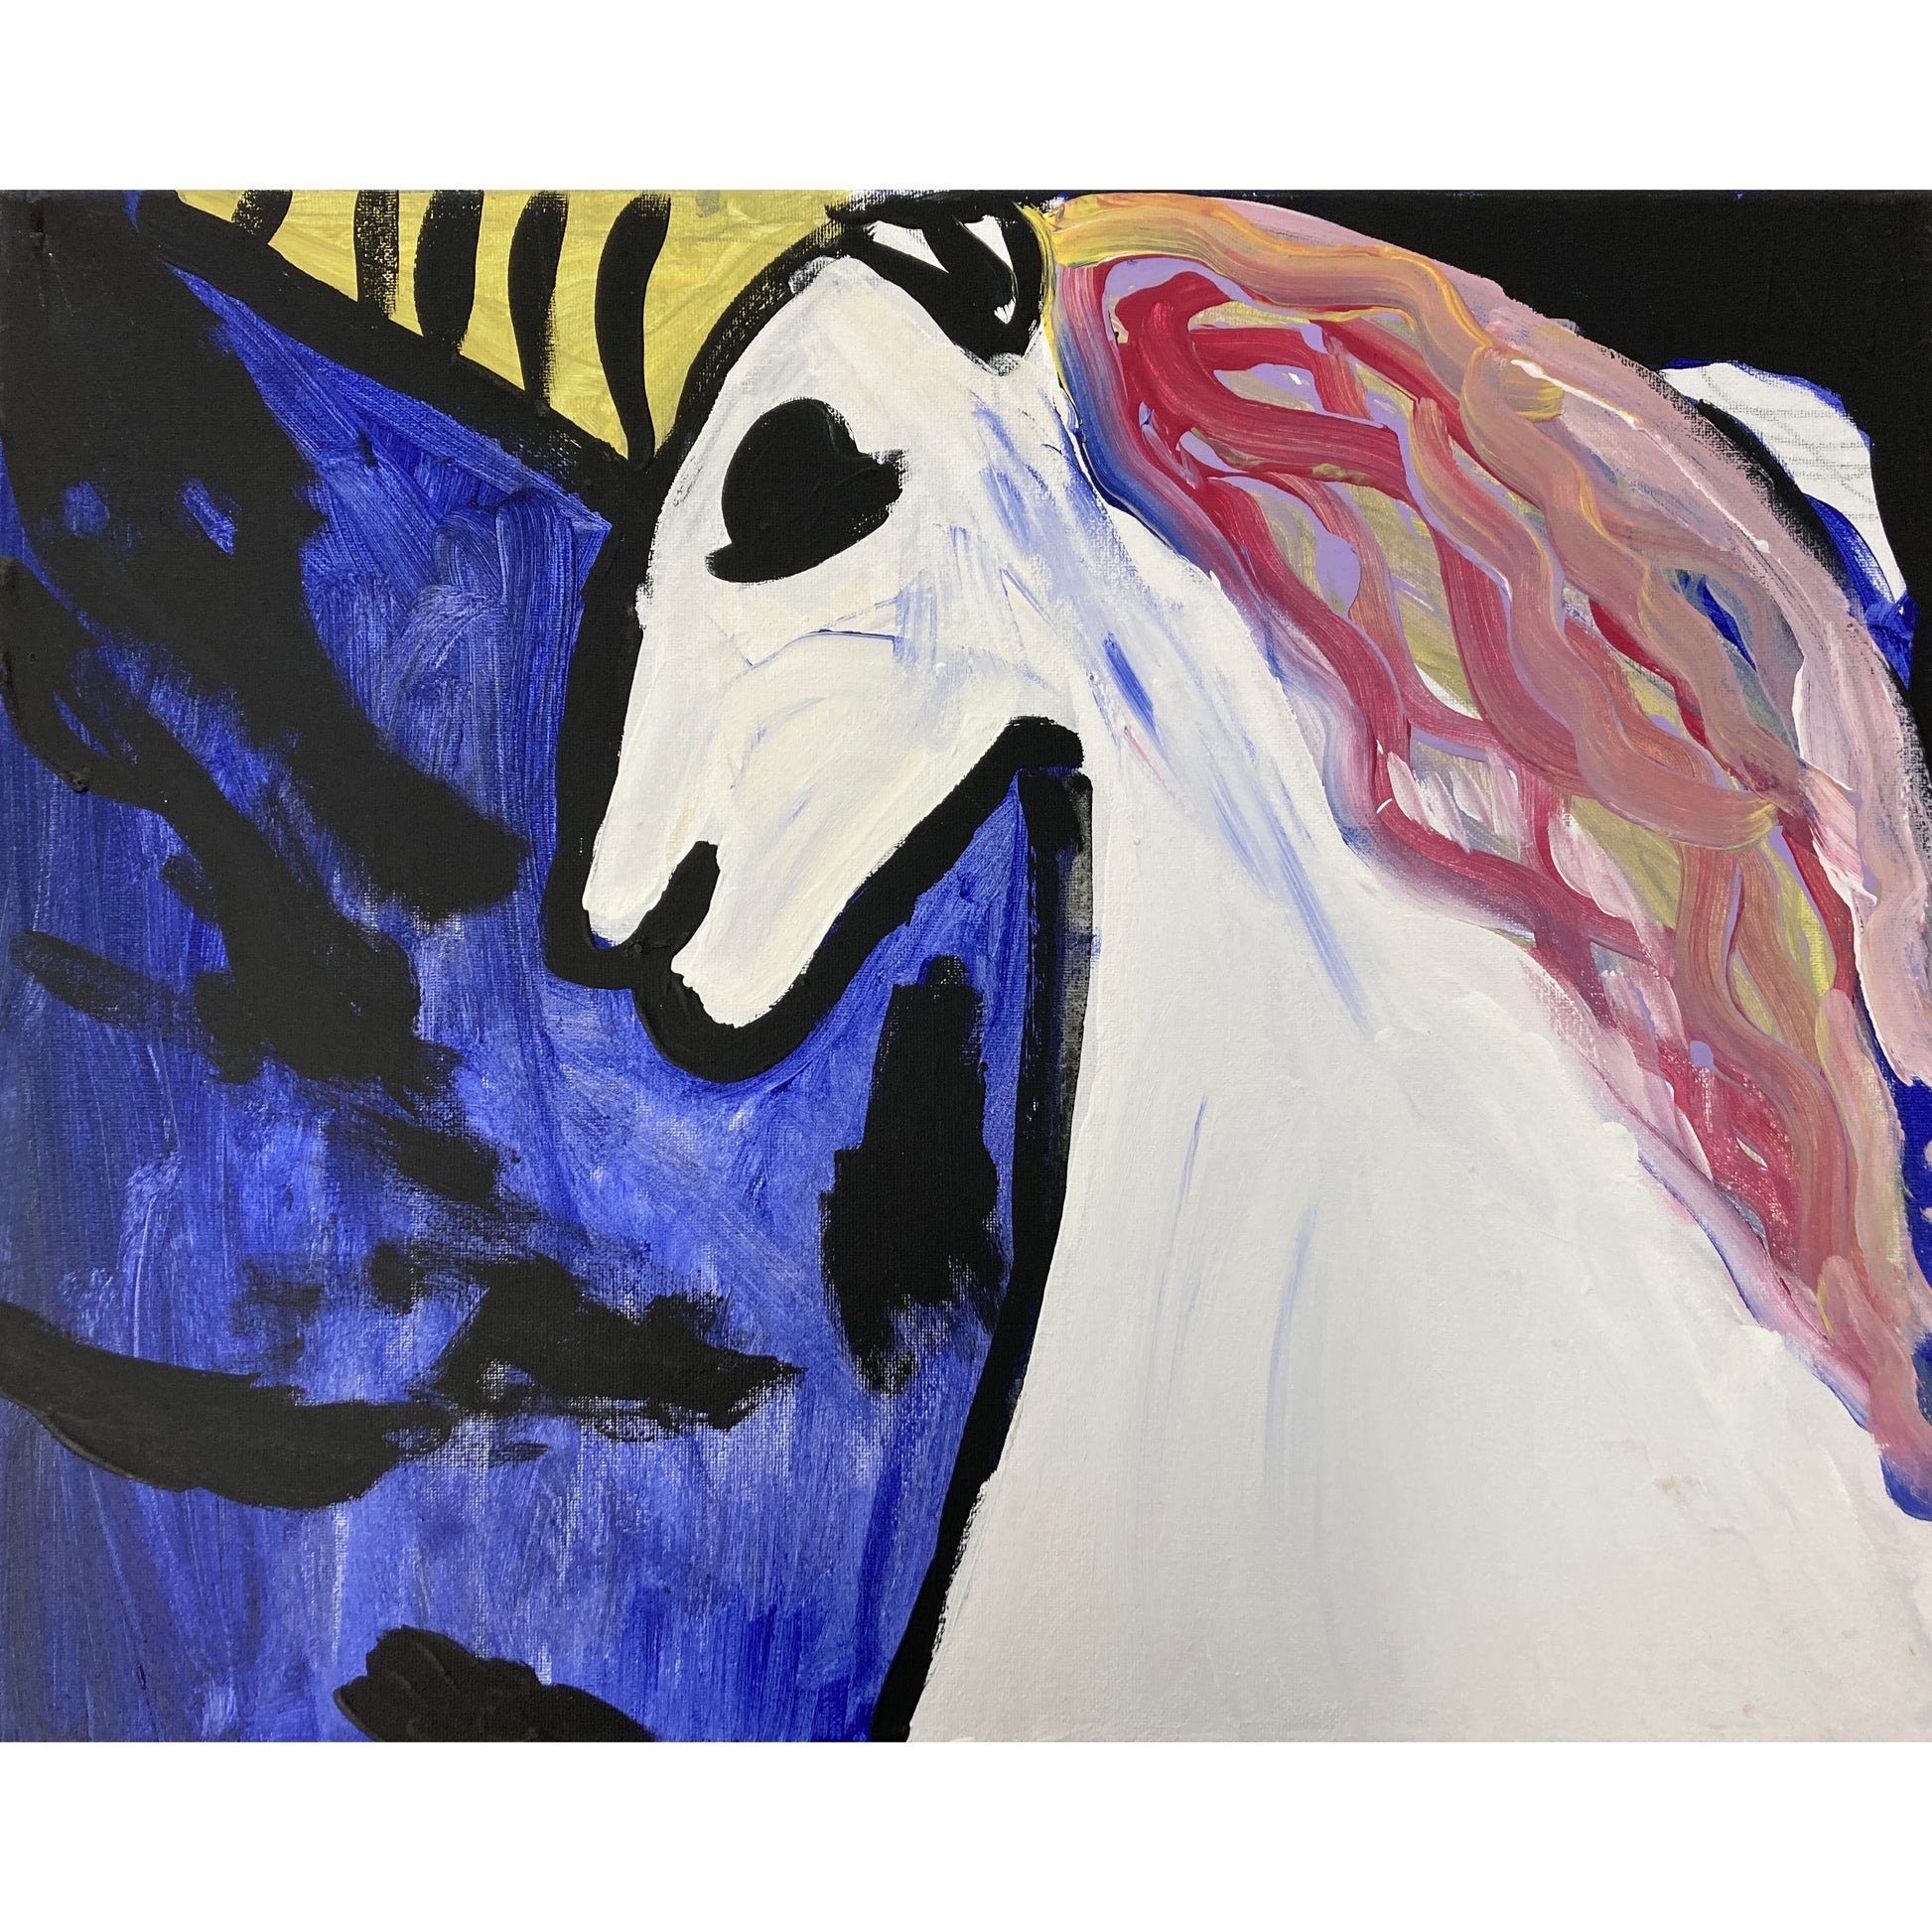 WATCH Resources Art Guild - Acrylic Paint on Stretched Canvas, 20 x 16 Original Fine Art, Abstract Unicorn made by Emily Knoles